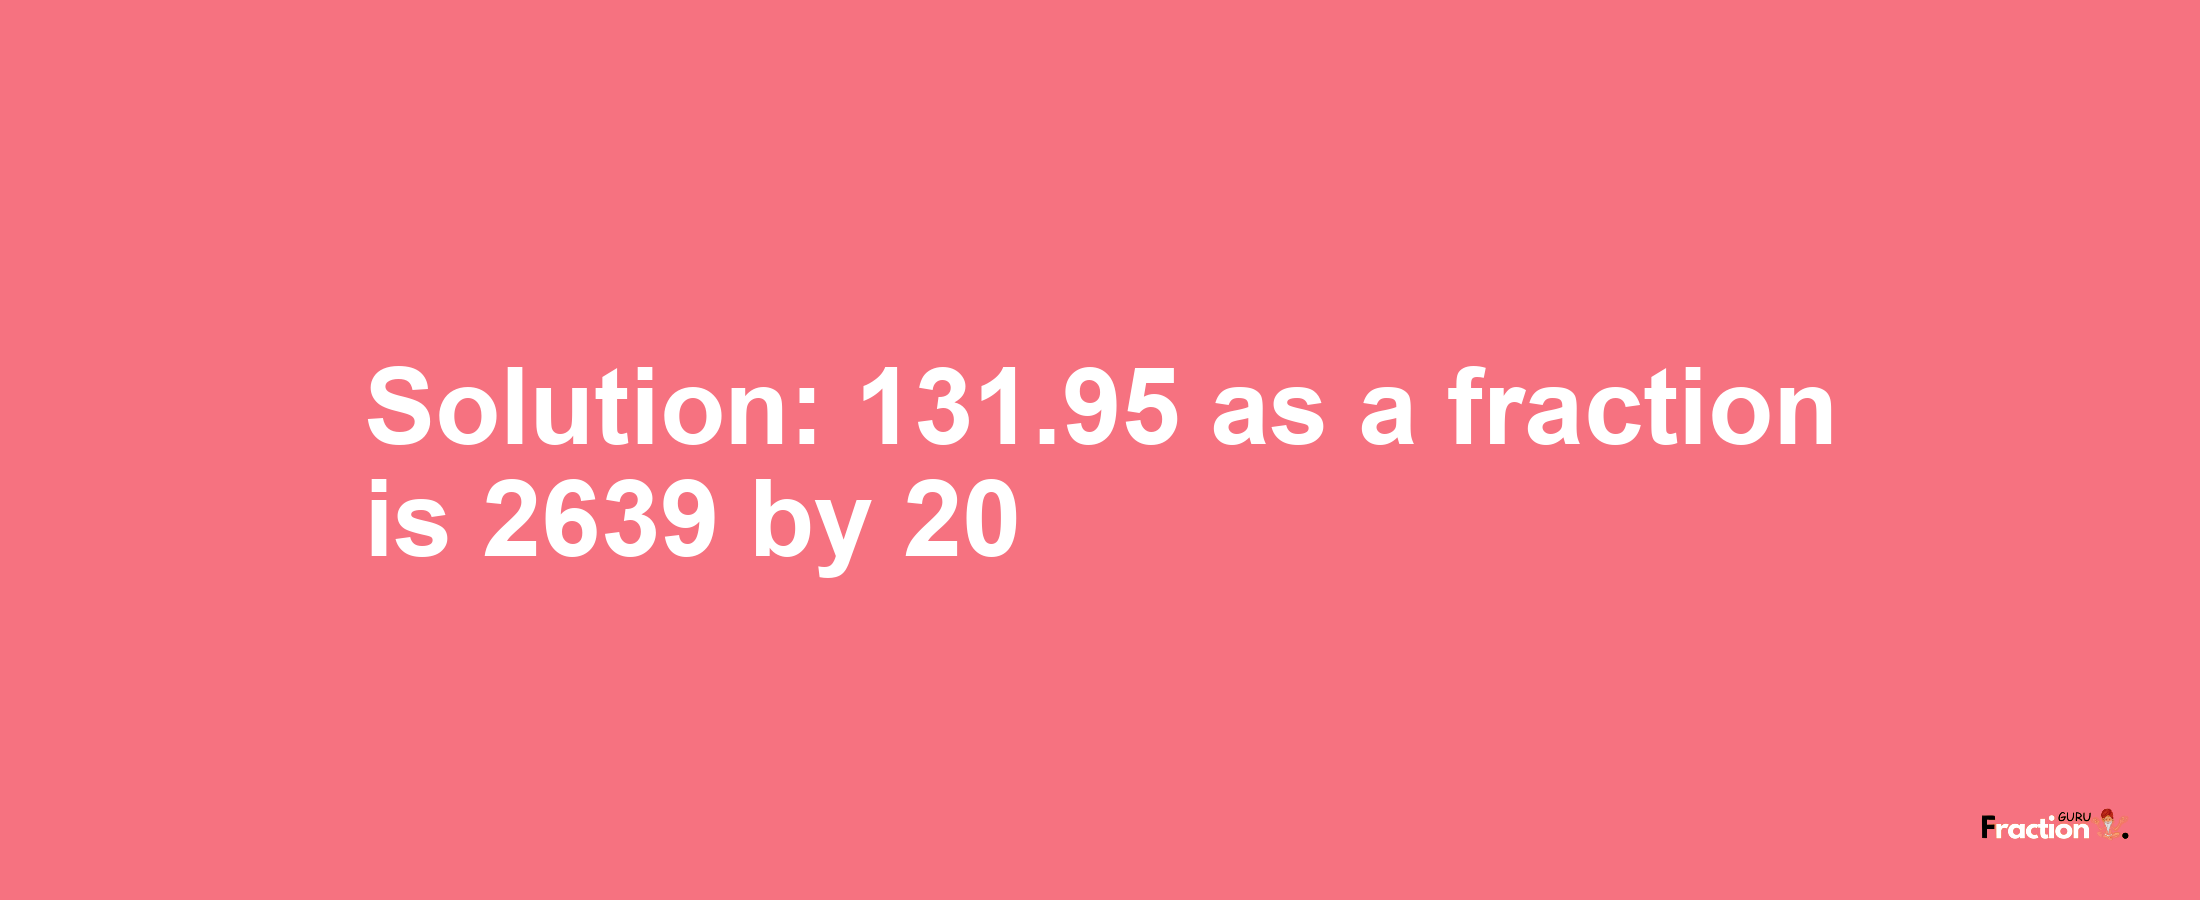 Solution:131.95 as a fraction is 2639/20